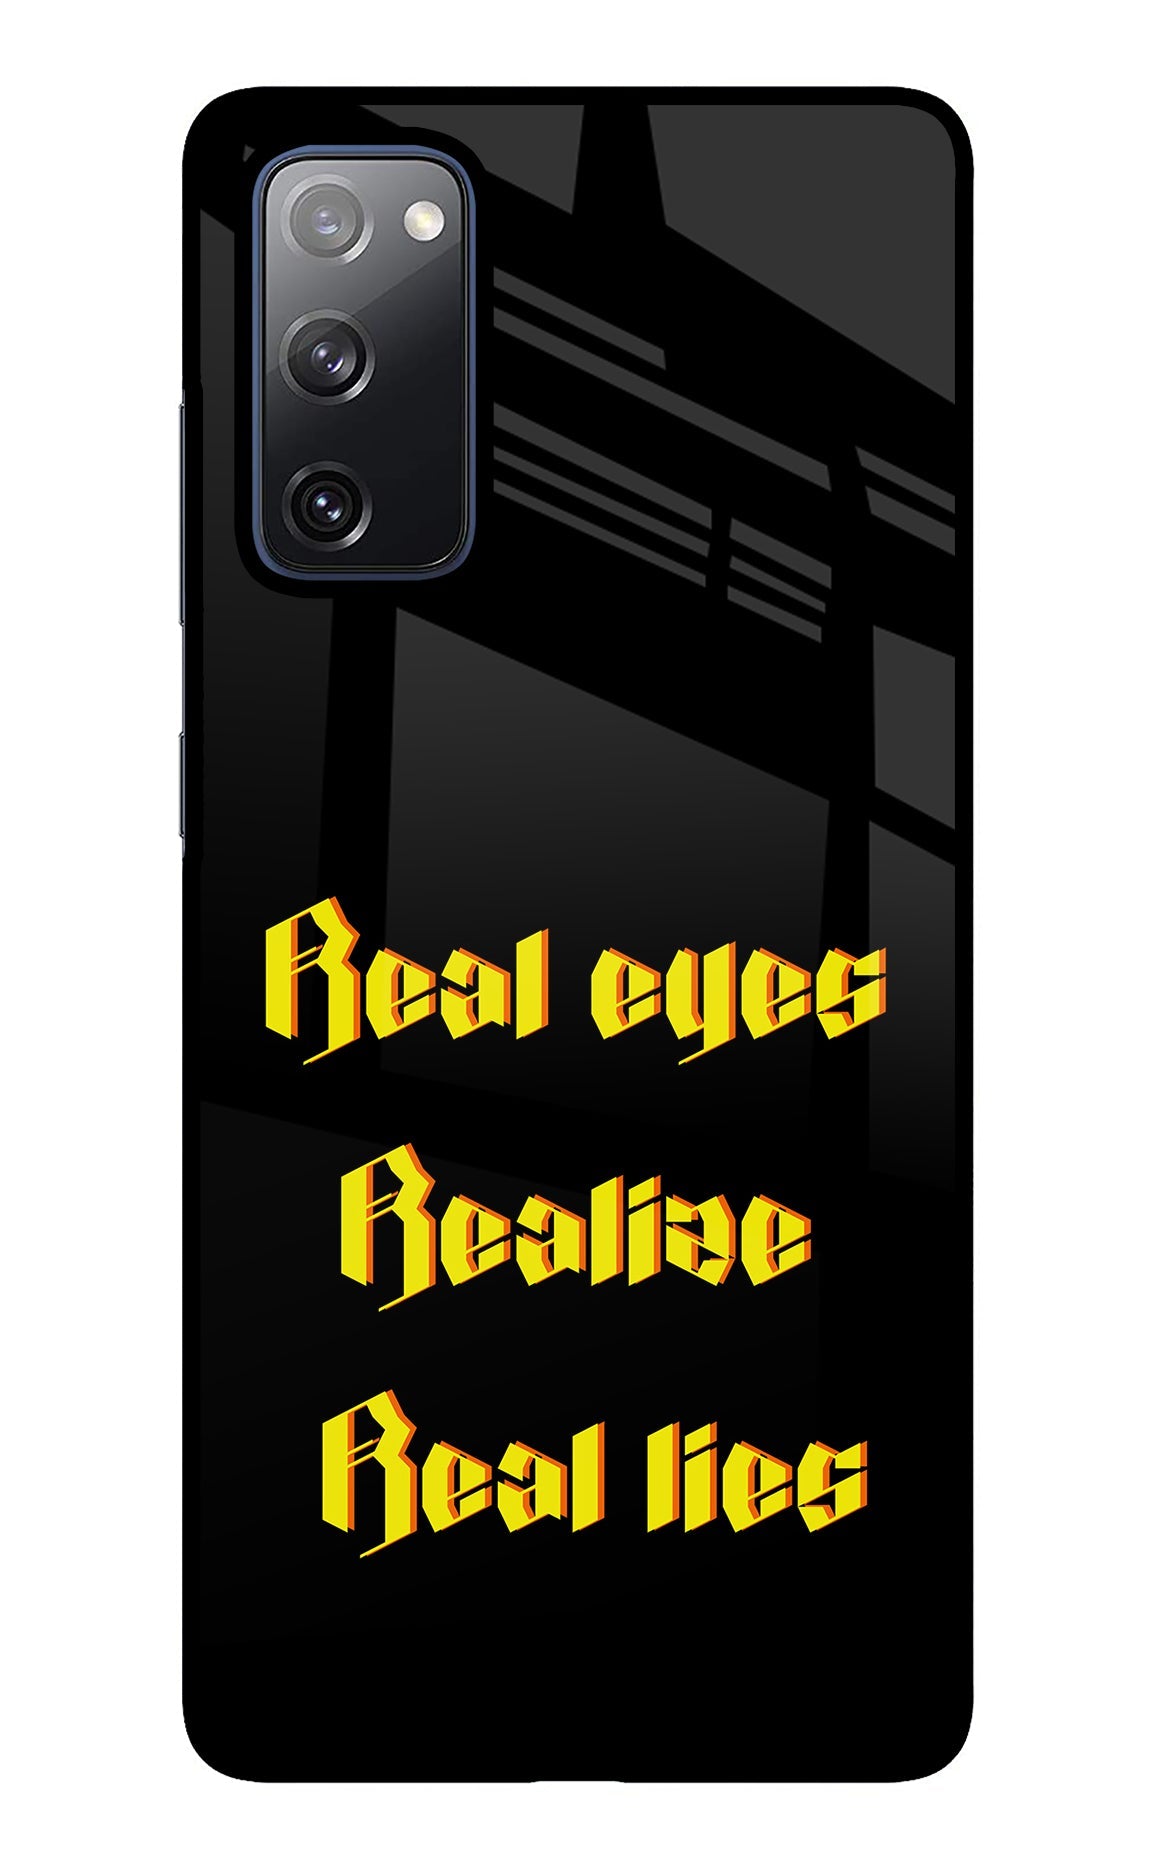 Real Eyes Realize Real Lies Samsung S20 FE Glass Case